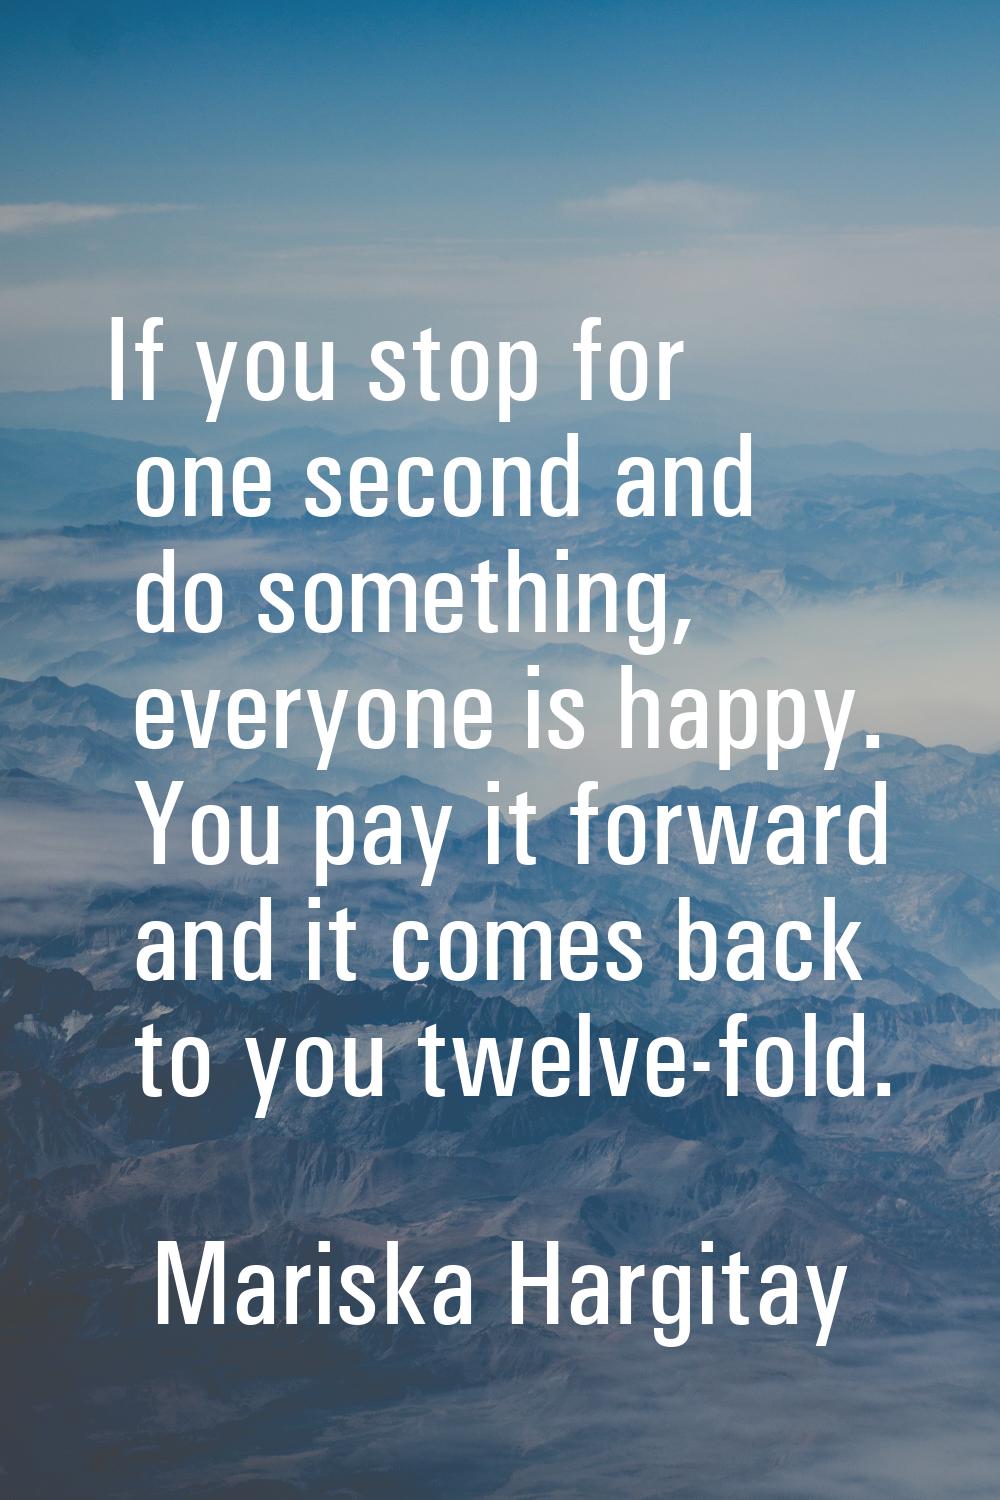 If you stop for one second and do something, everyone is happy. You pay it forward and it comes bac